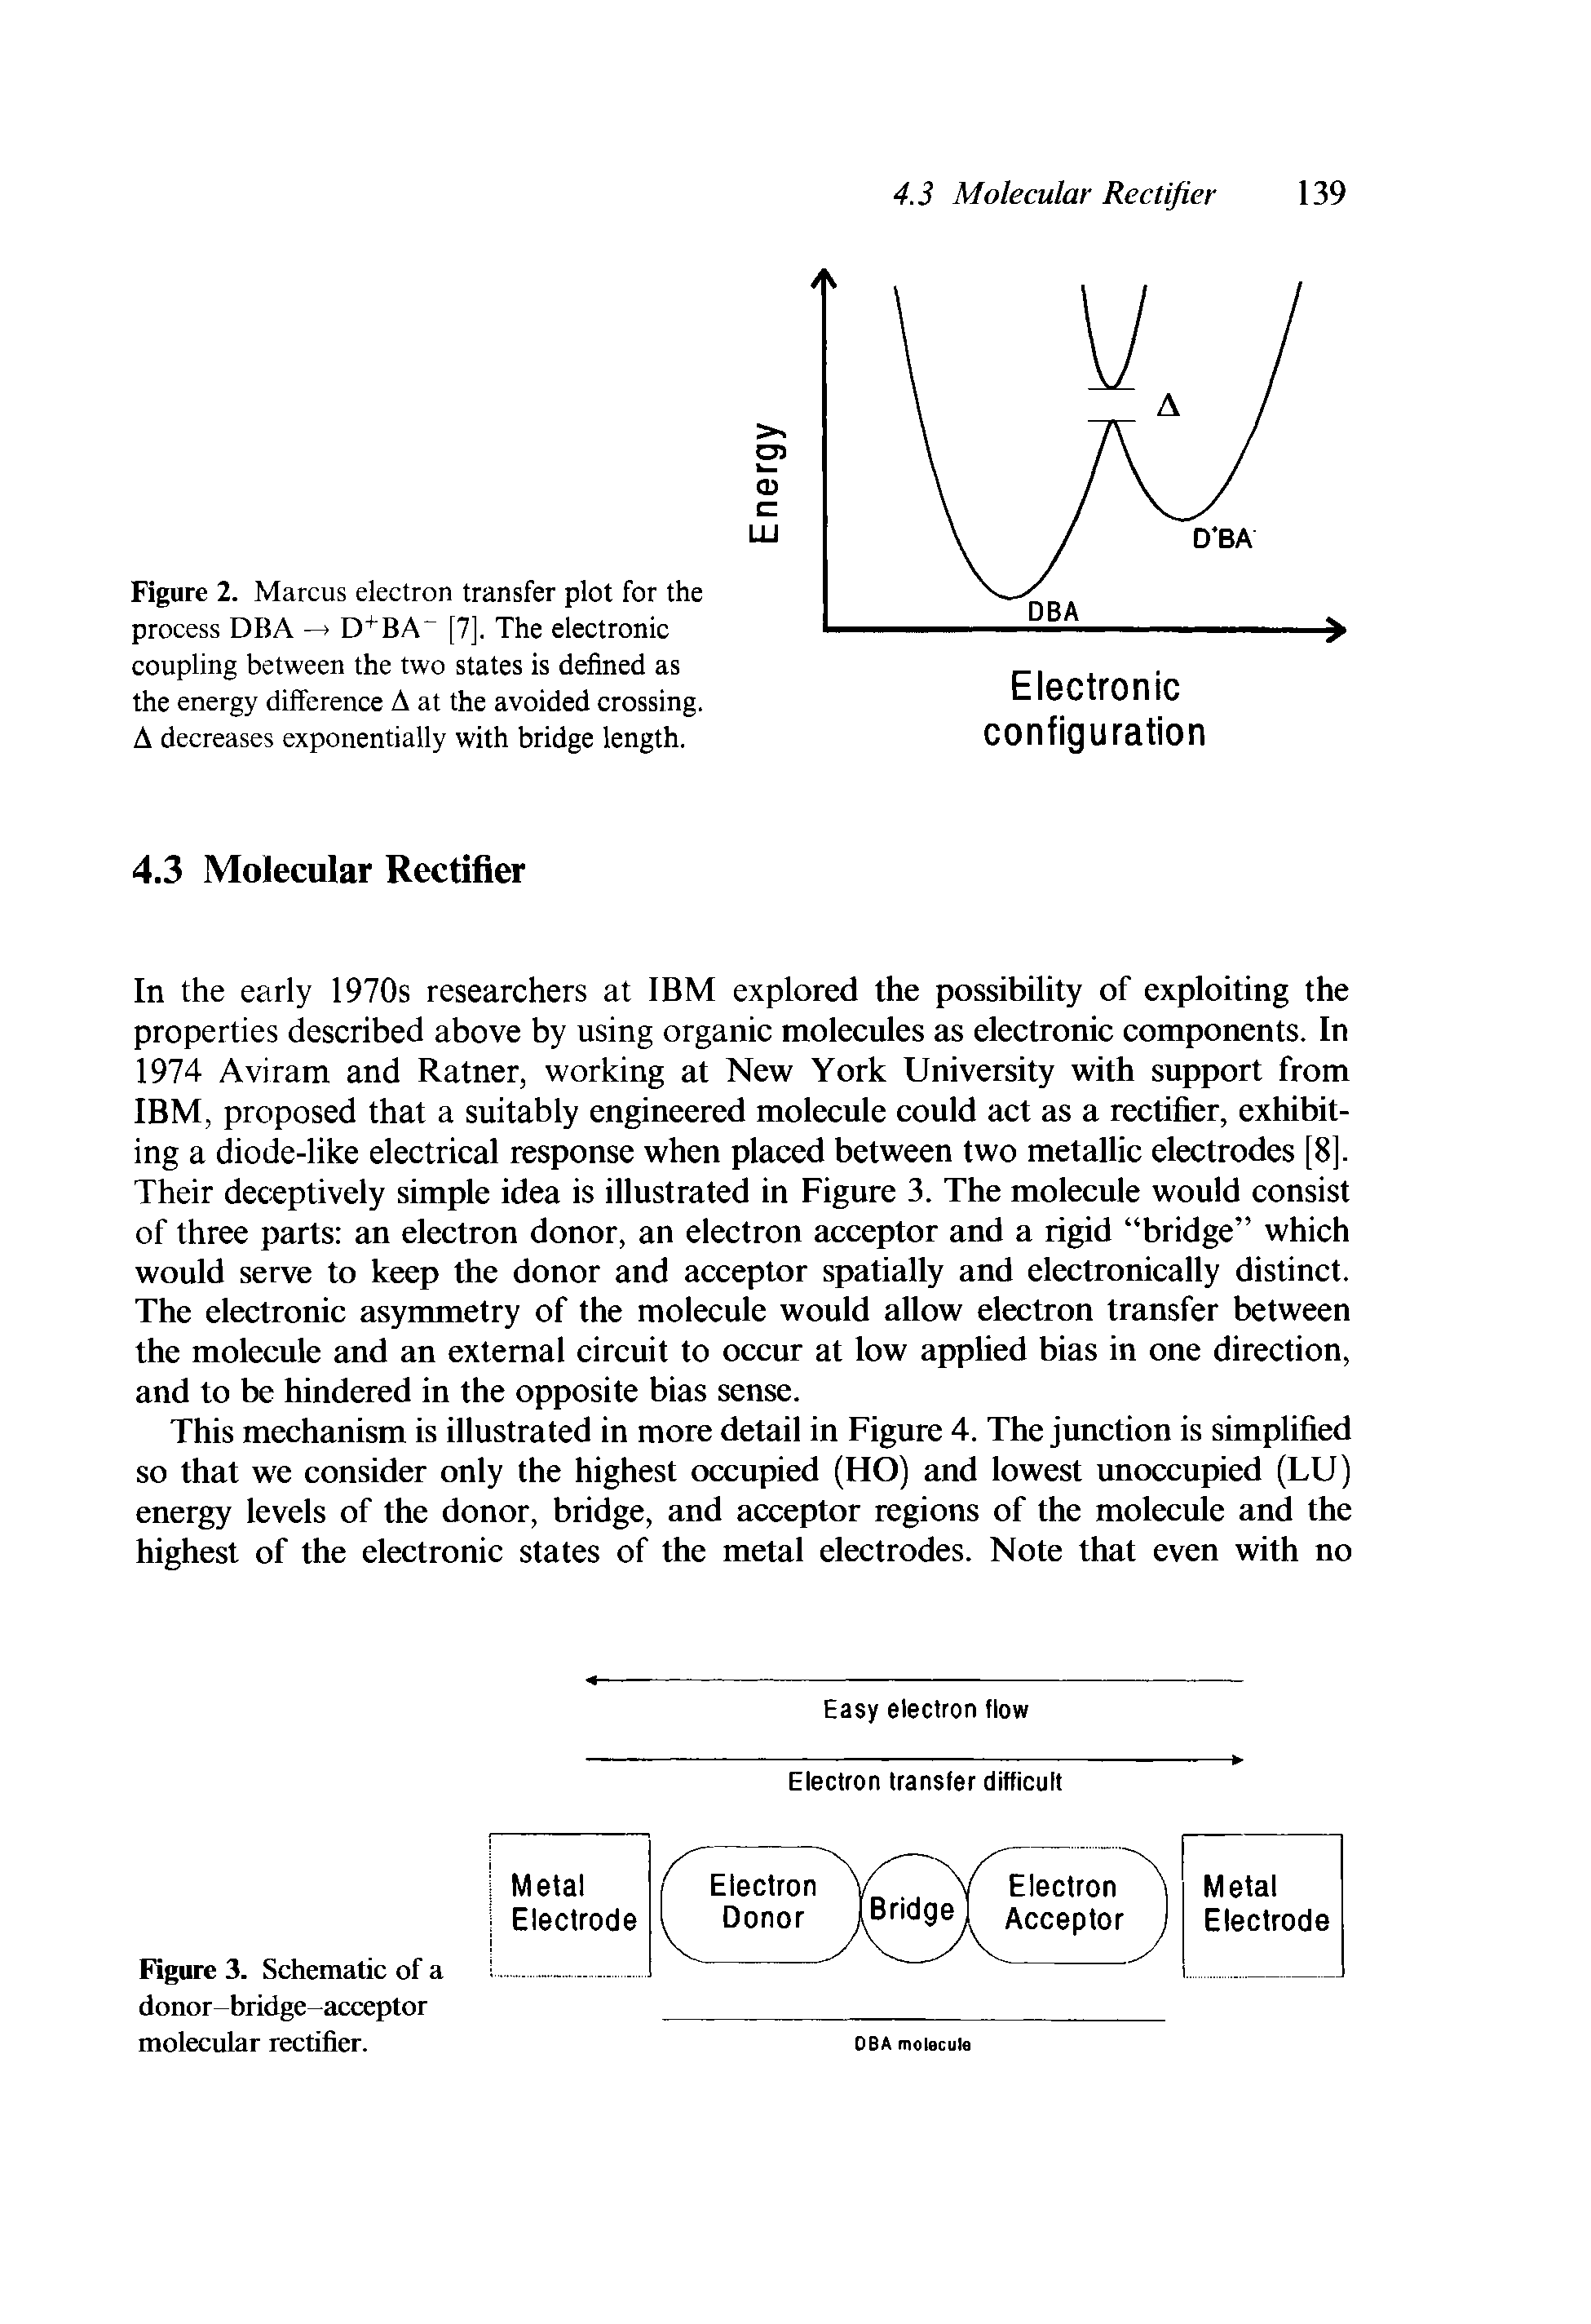 Figure 2. Marcus electron transfer plot for the process DBA D" BA [7], The electronic coupling between the two states is defined as the energy difference A at the avoided crossing. A decreases exponentially with bridge length.